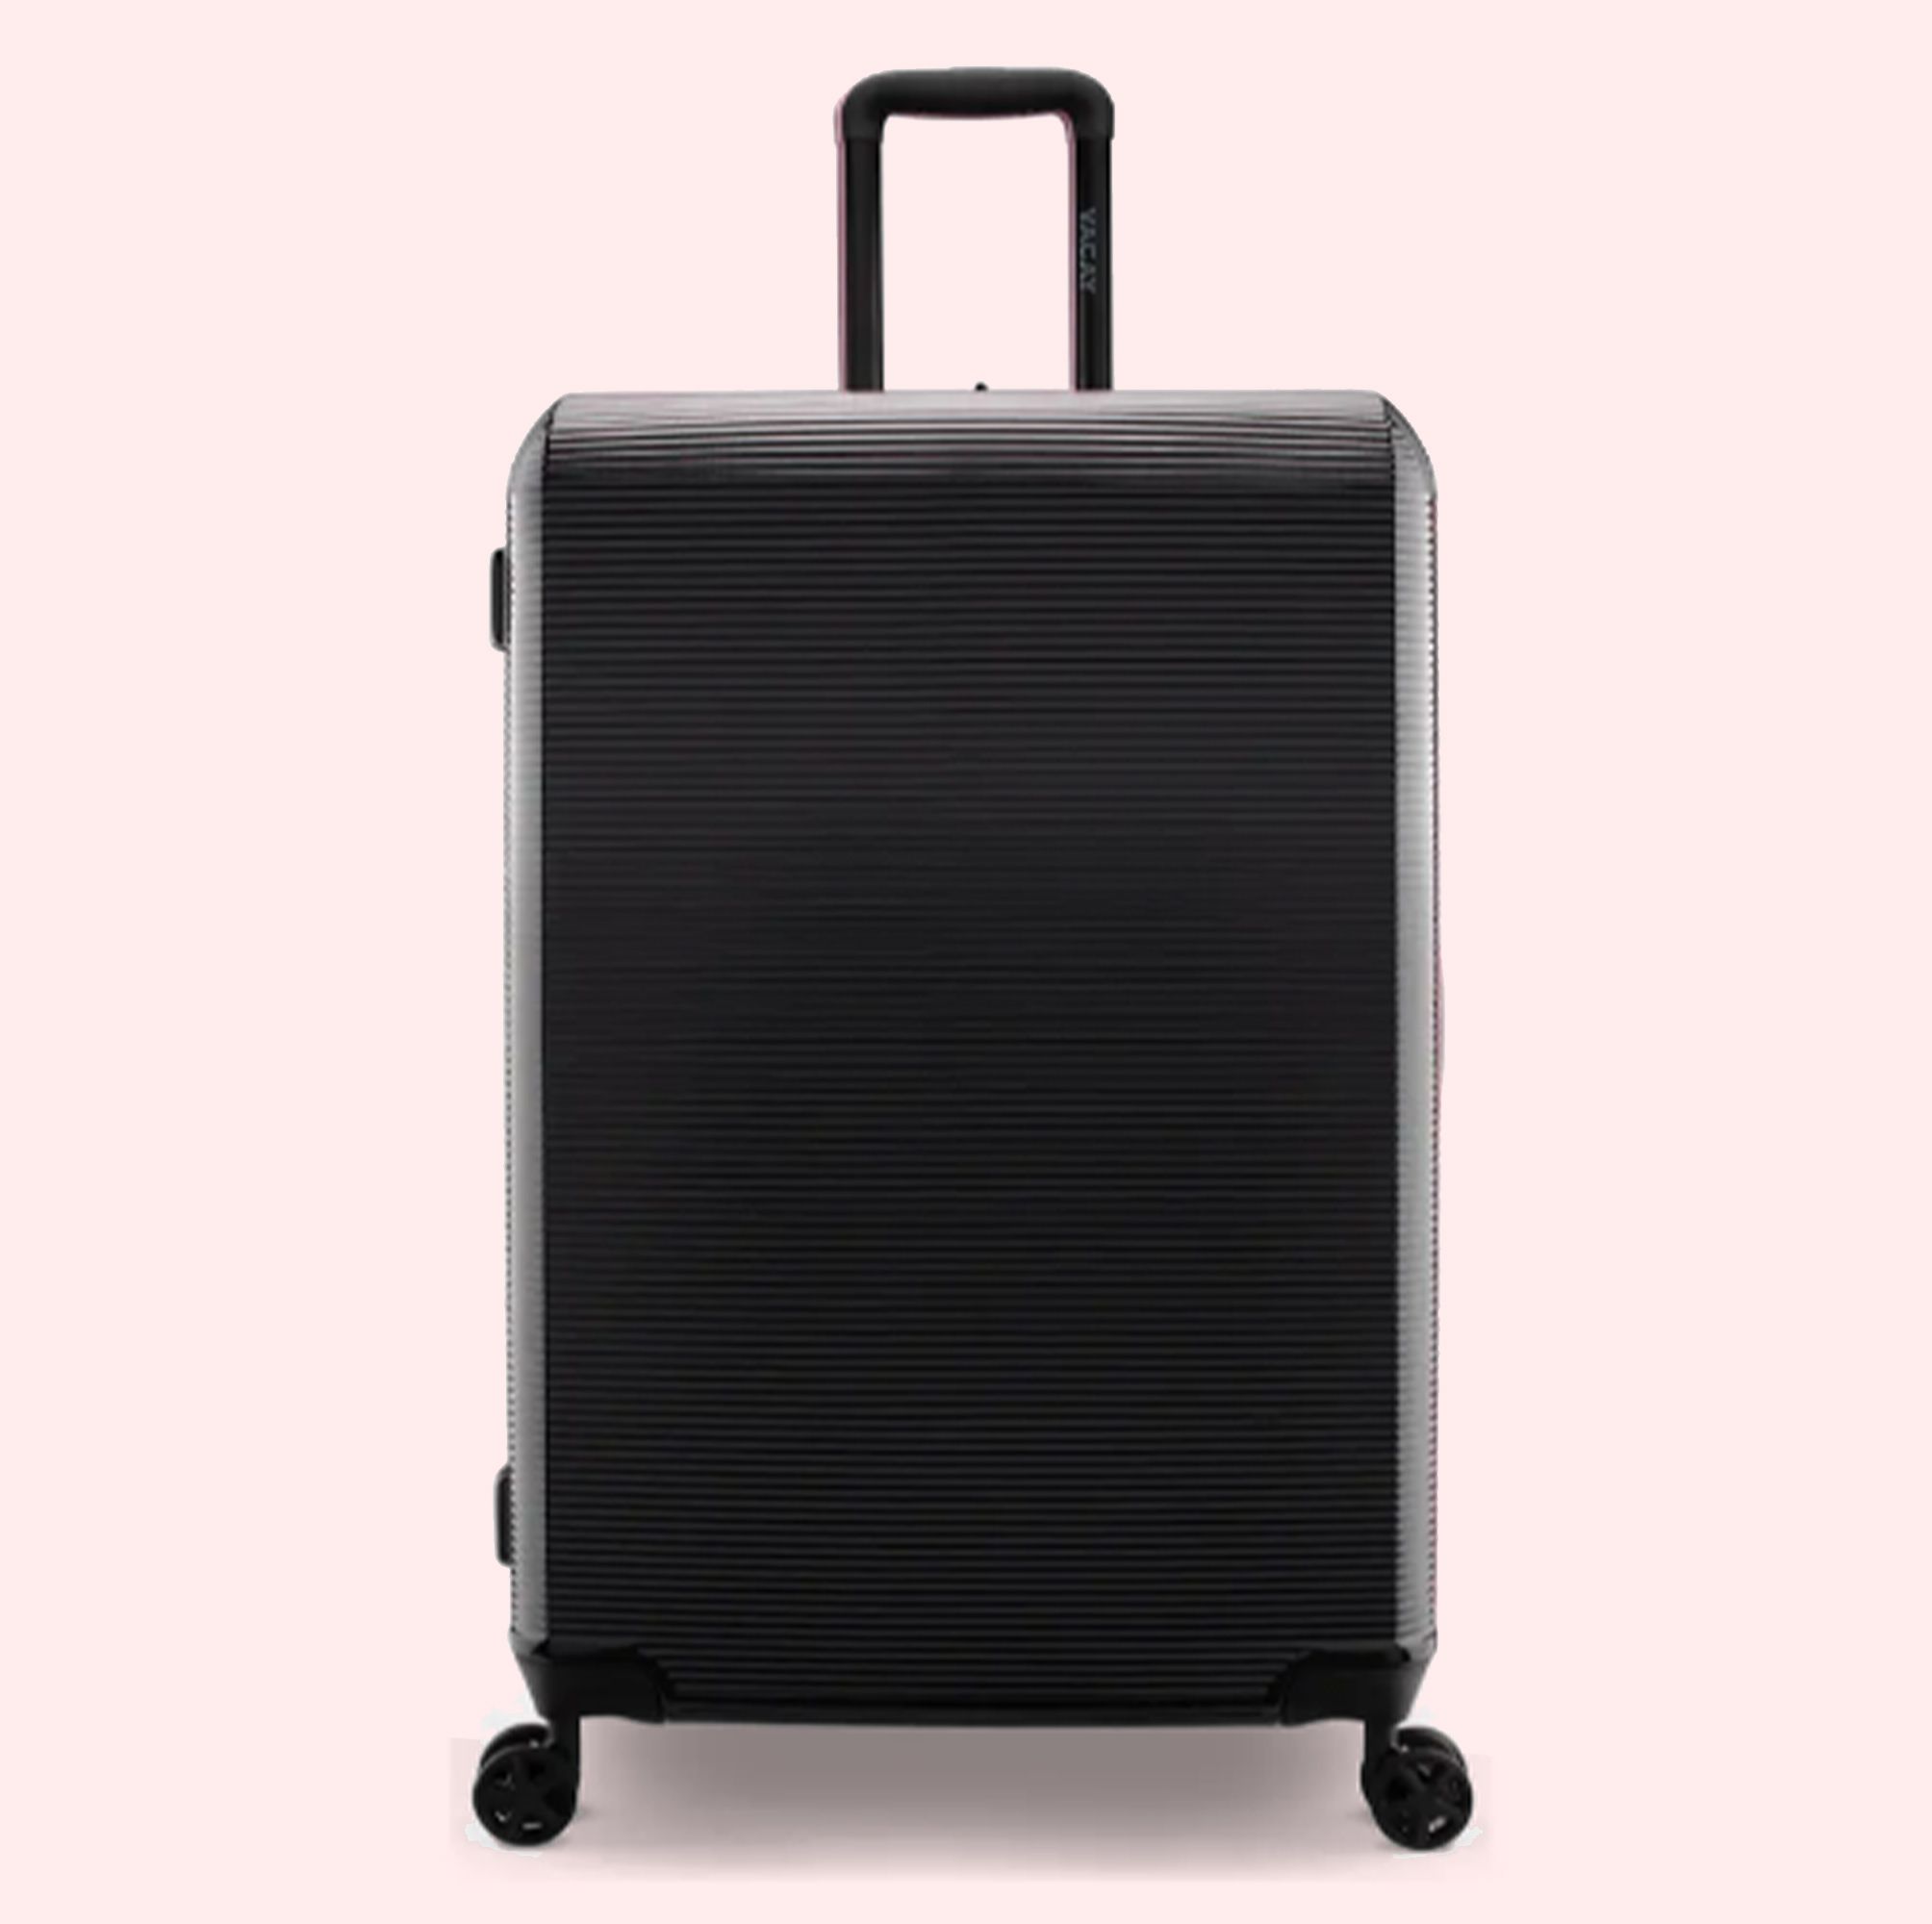 Every Luggage Deal Worth Knowing About (and Shopping) During Anniversary Sale